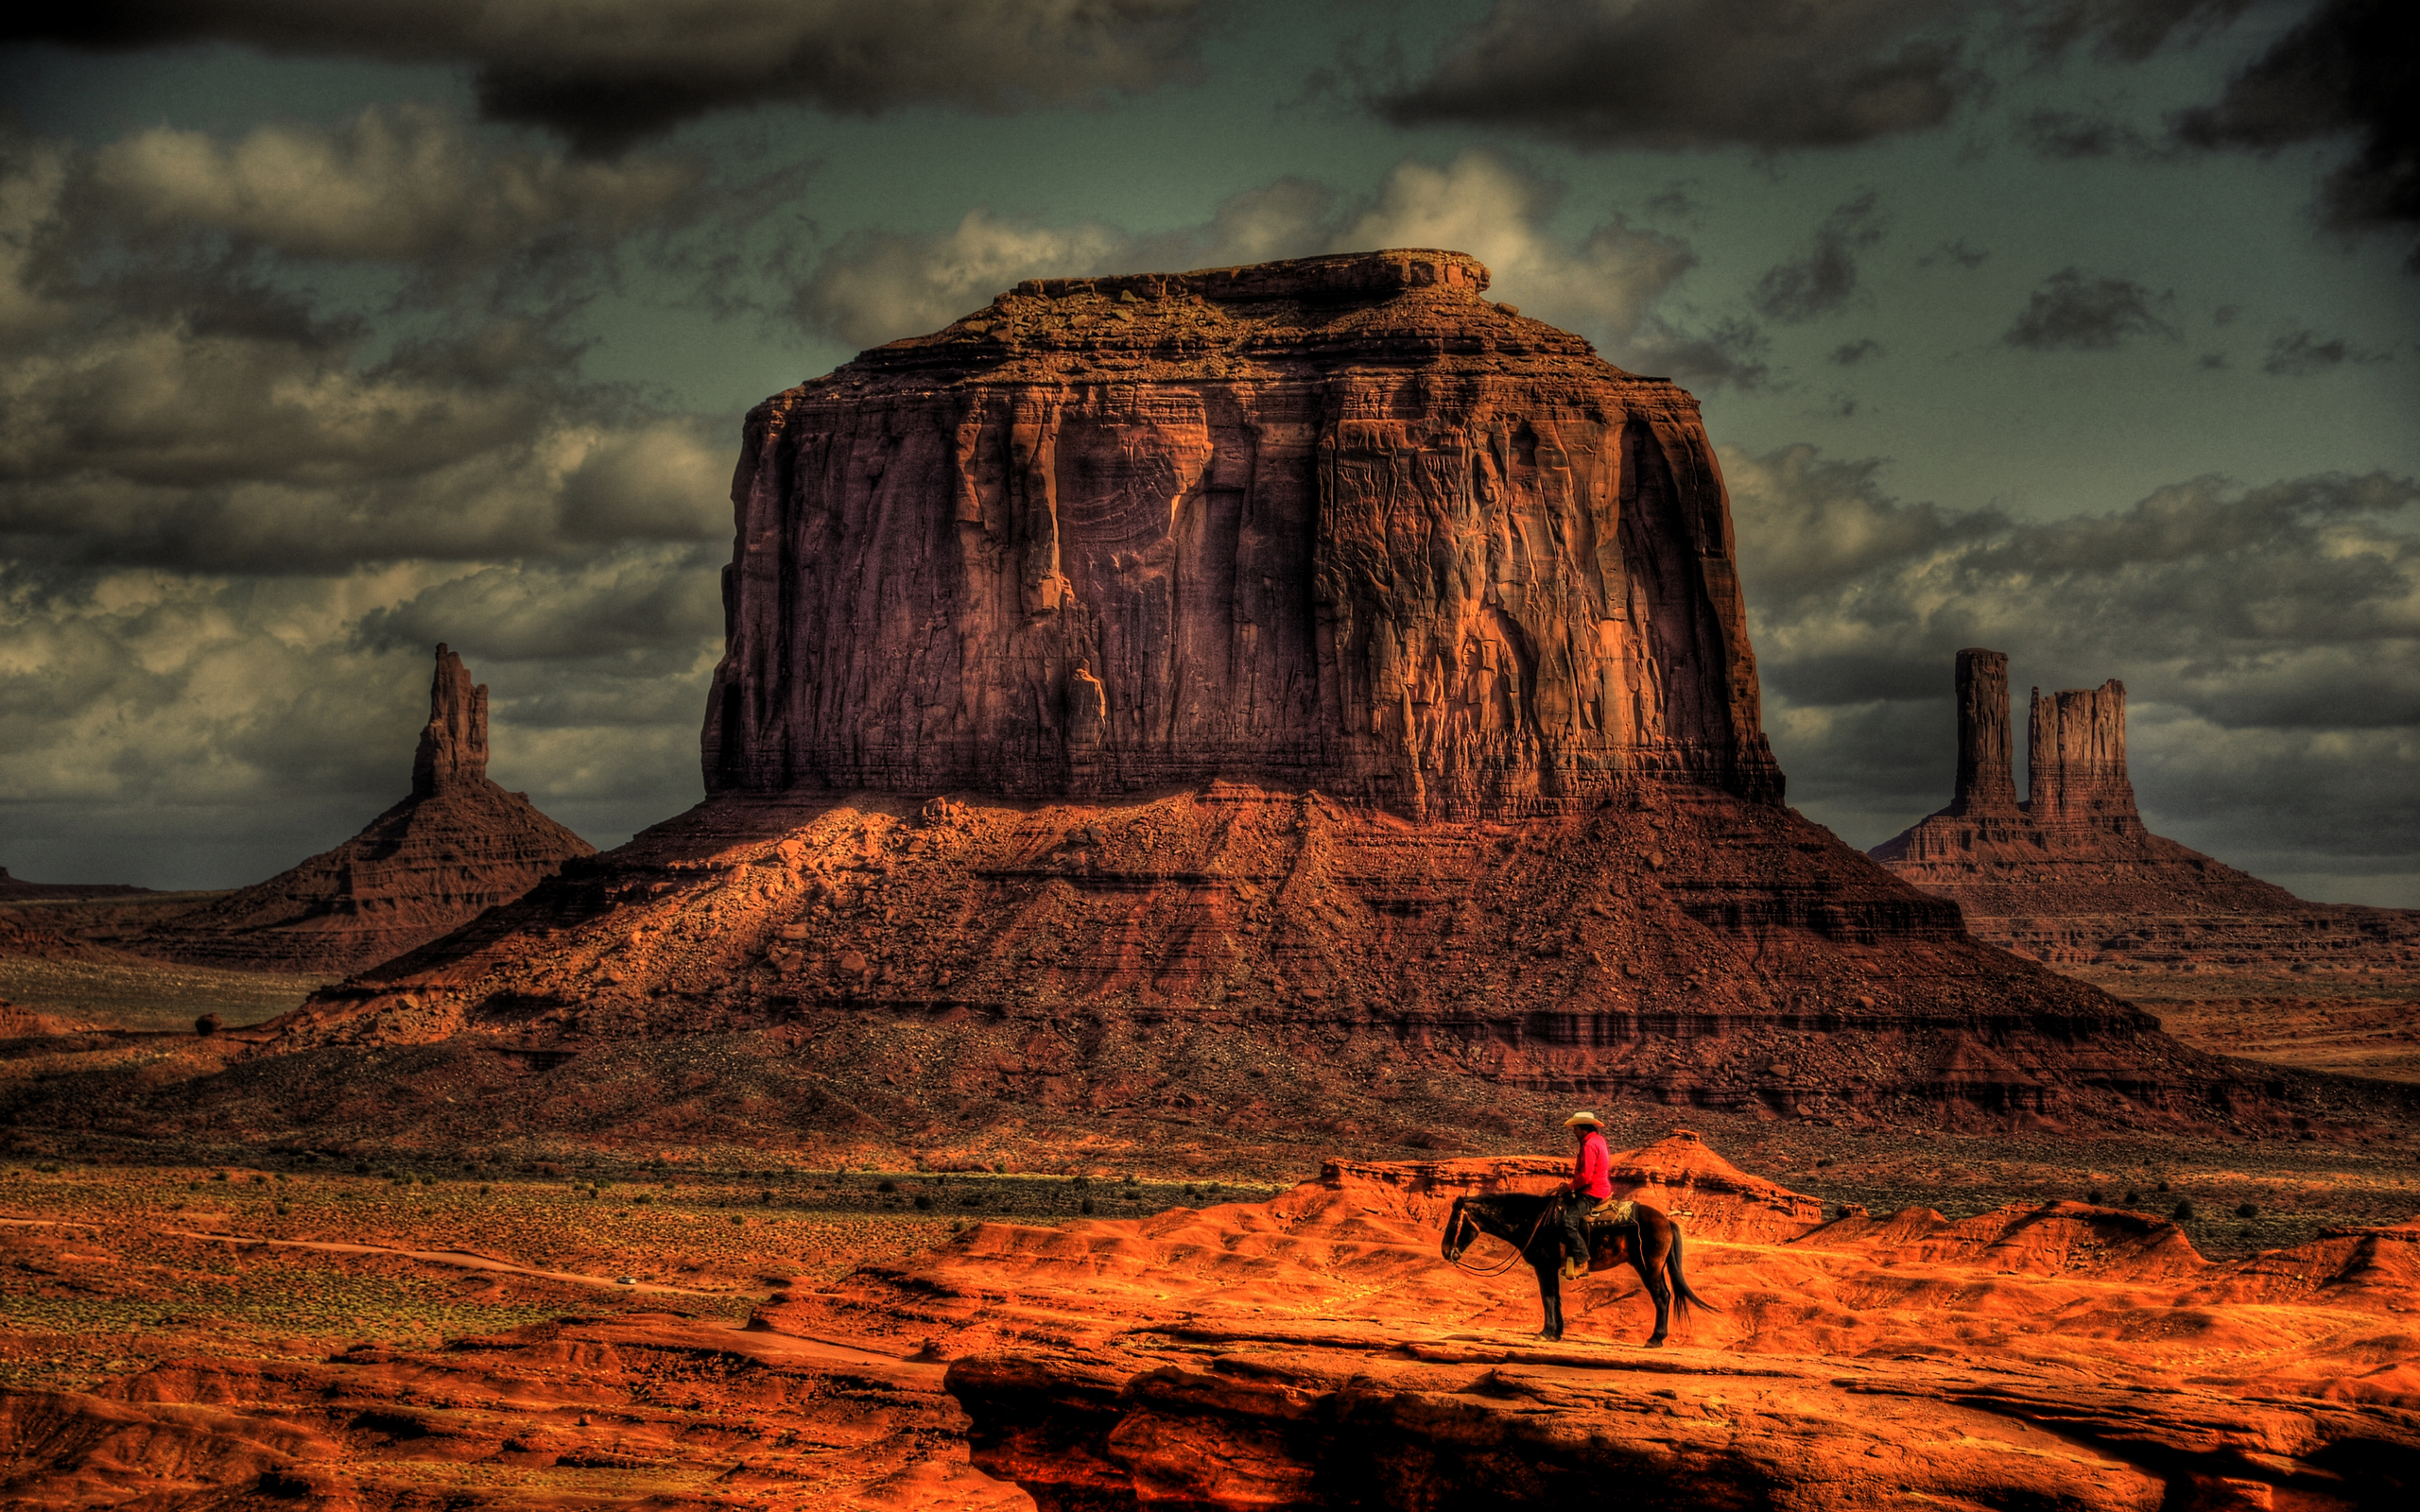 how many films did john ford shoot in monument valley on the arizona utah line